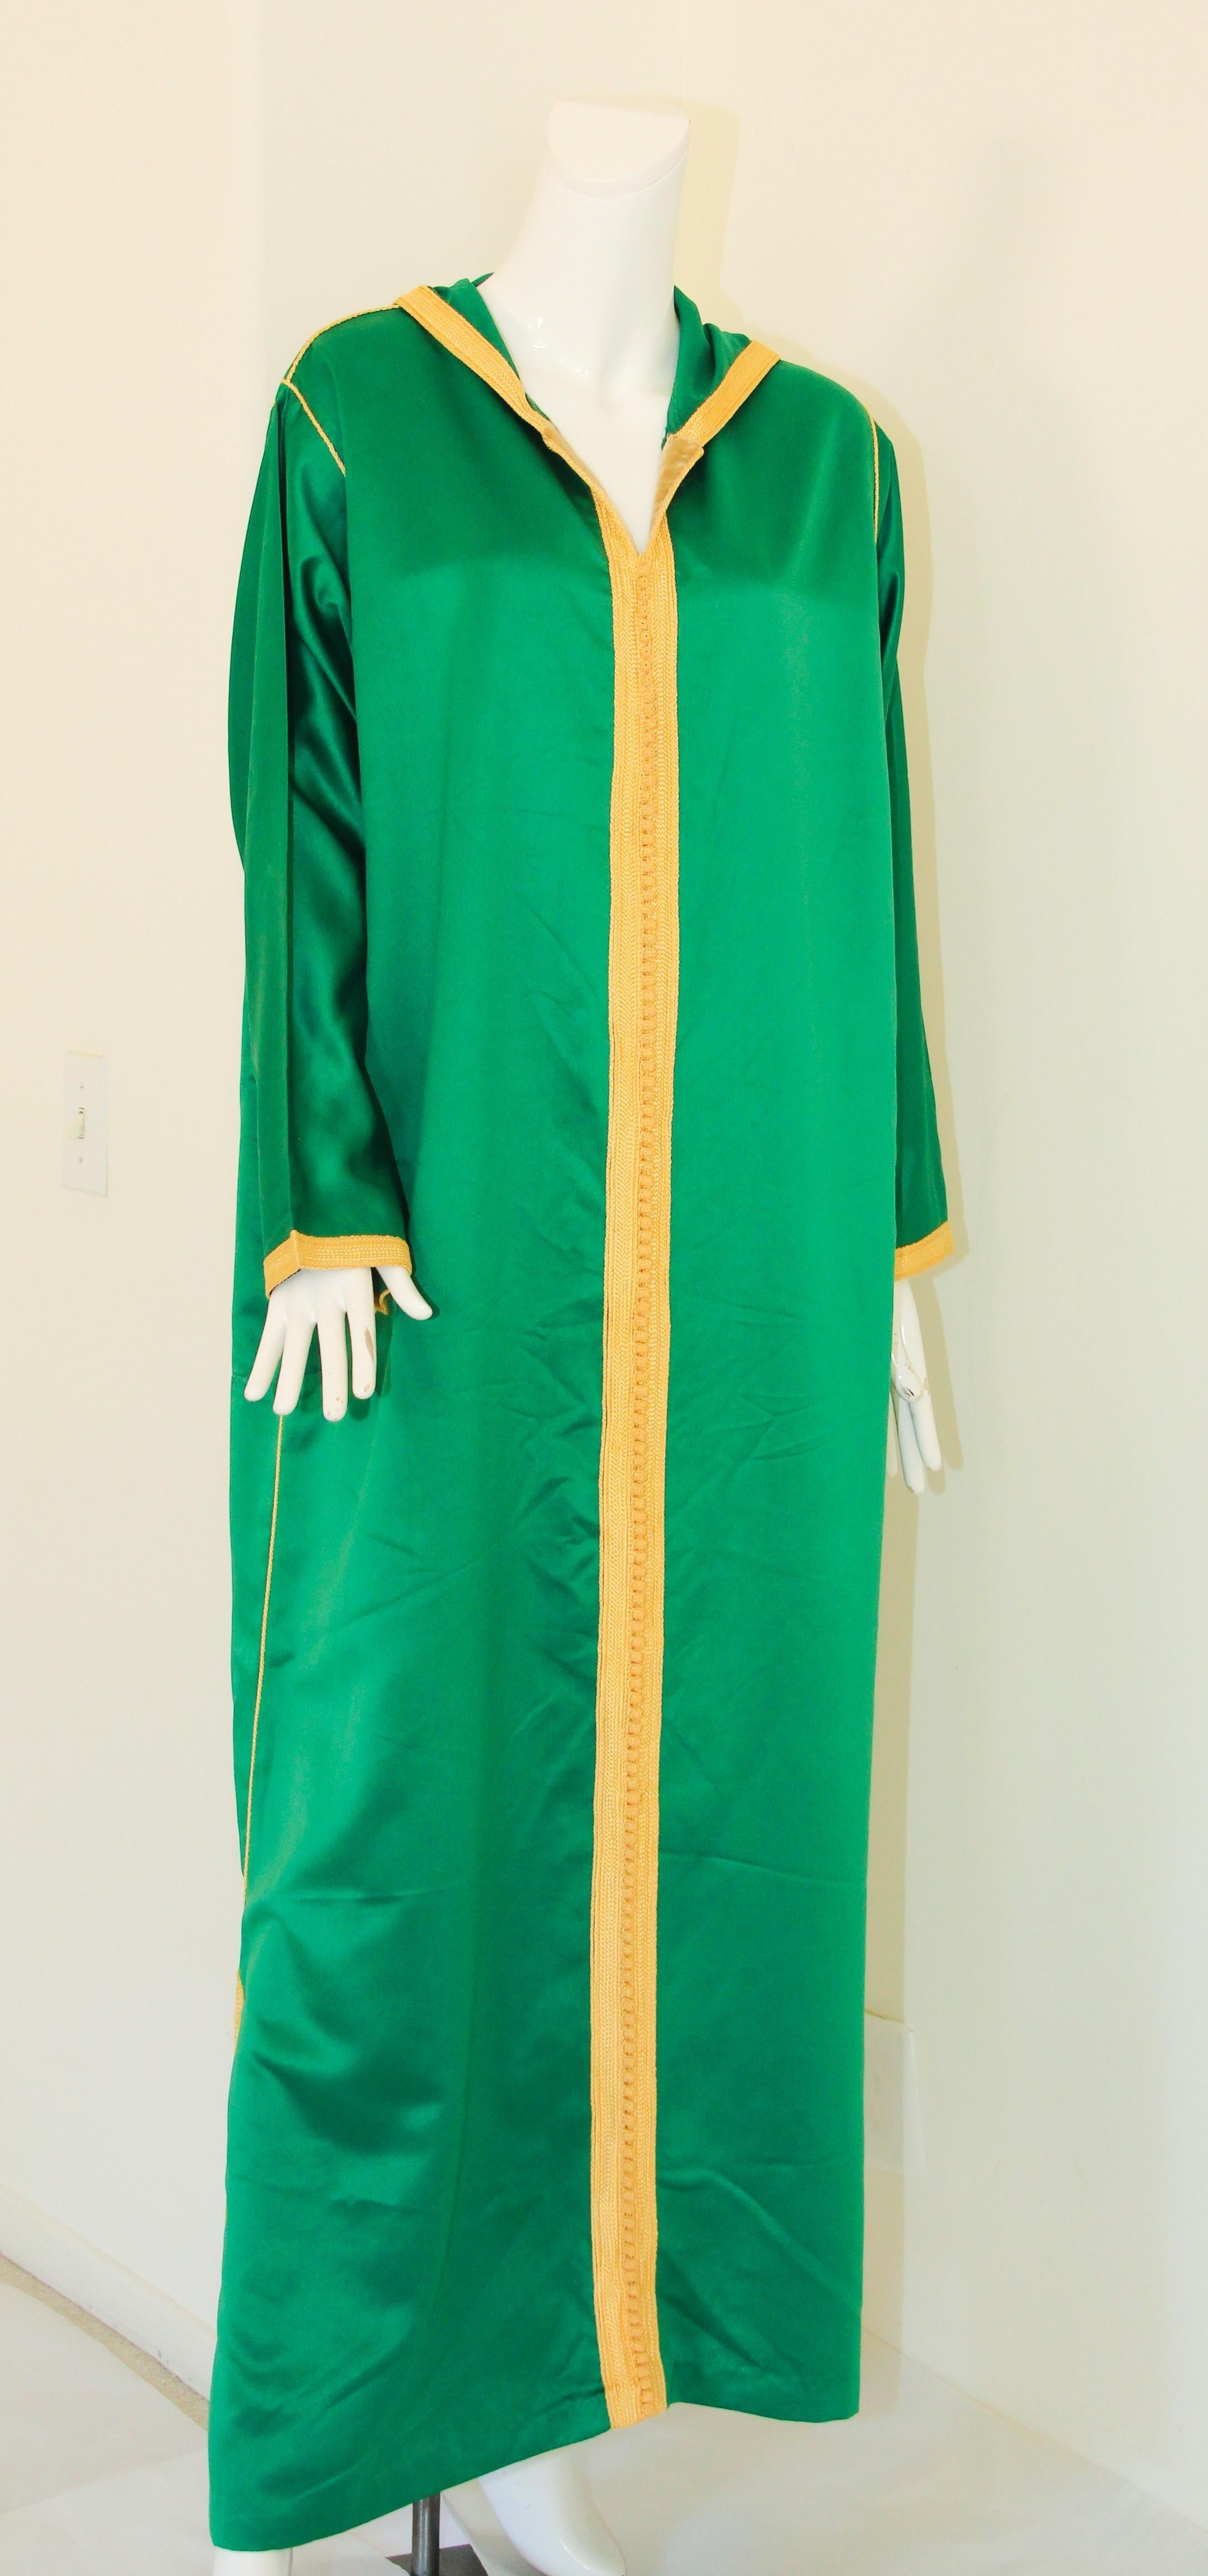 Moroccan Hooded Caftan Emerald Green Djellabah Kaftan In Good Condition For Sale In North Hollywood, CA